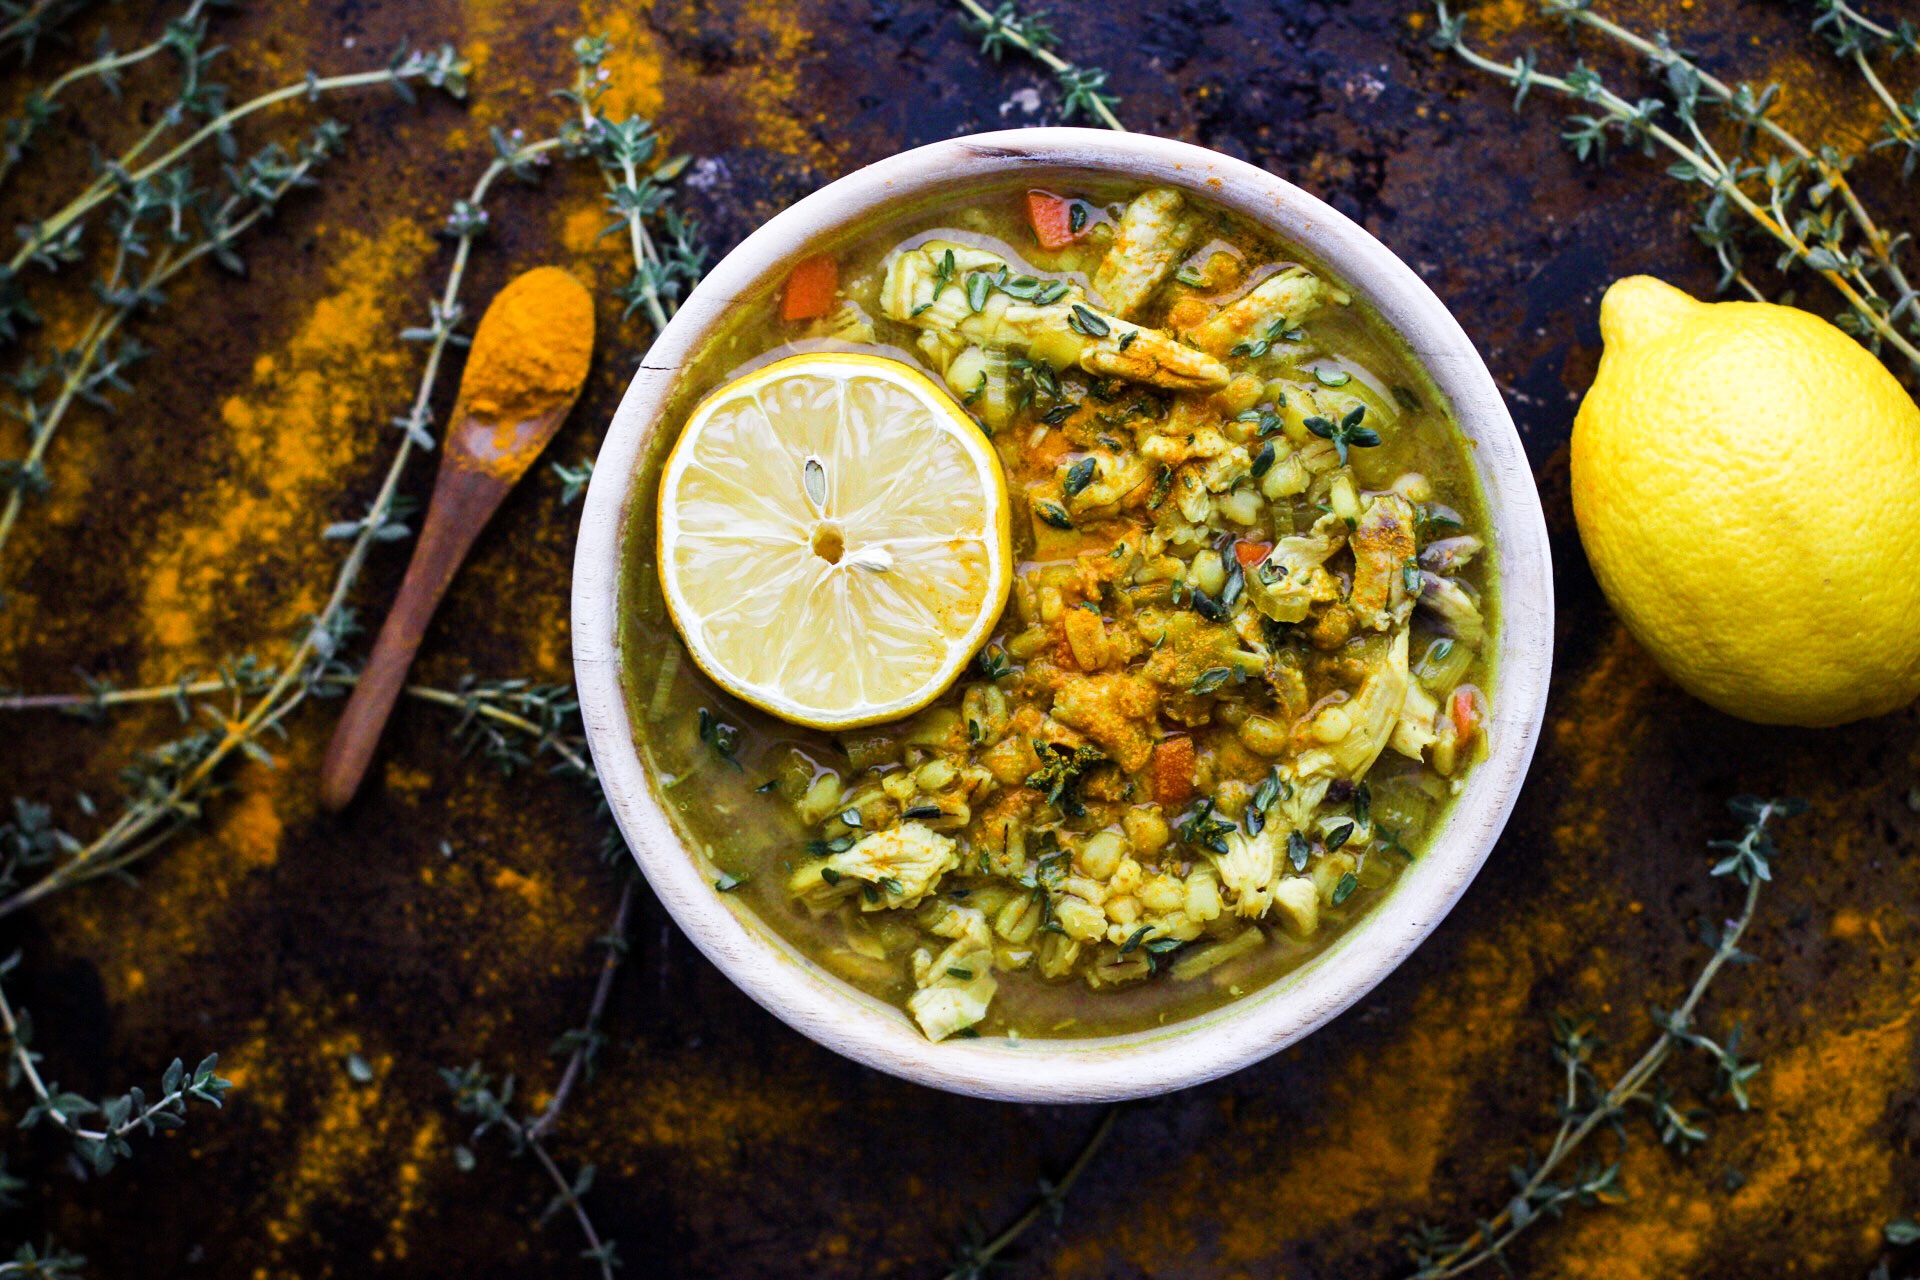 This Turmeric Ginger Chicken Barley Soup is for the sick and weary. Turmeric powder, fresh grated ginger, wholesome chicken broth, chicken, and roasted barley are slow cooked to cold fighting delicious perfection. | www.megiswell.com